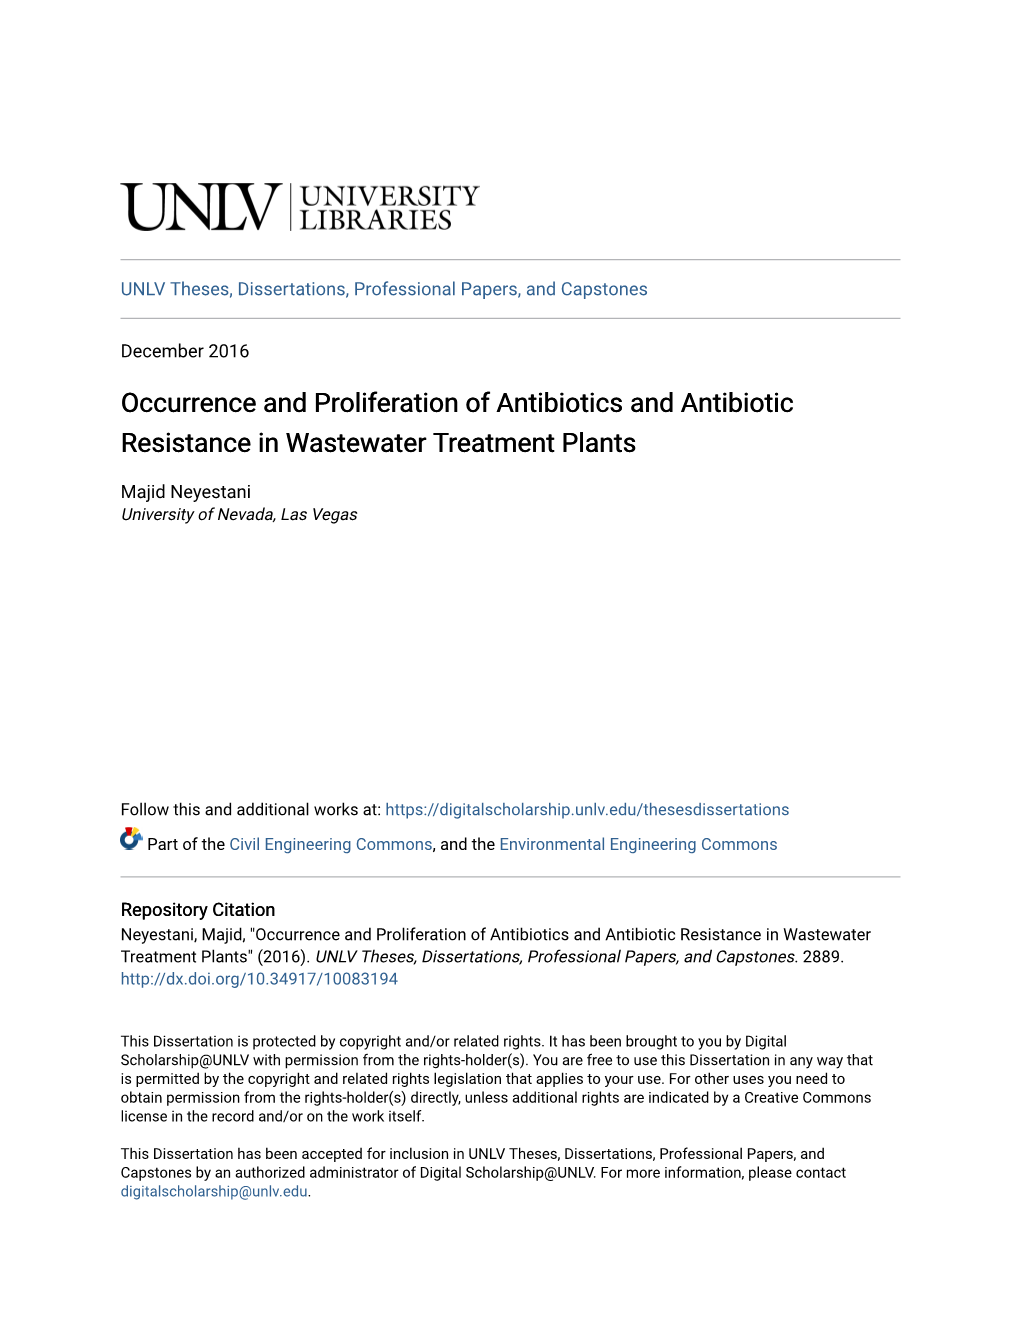 Occurrence and Proliferation of Antibiotics and Antibiotic Resistance in Wastewater Treatment Plants